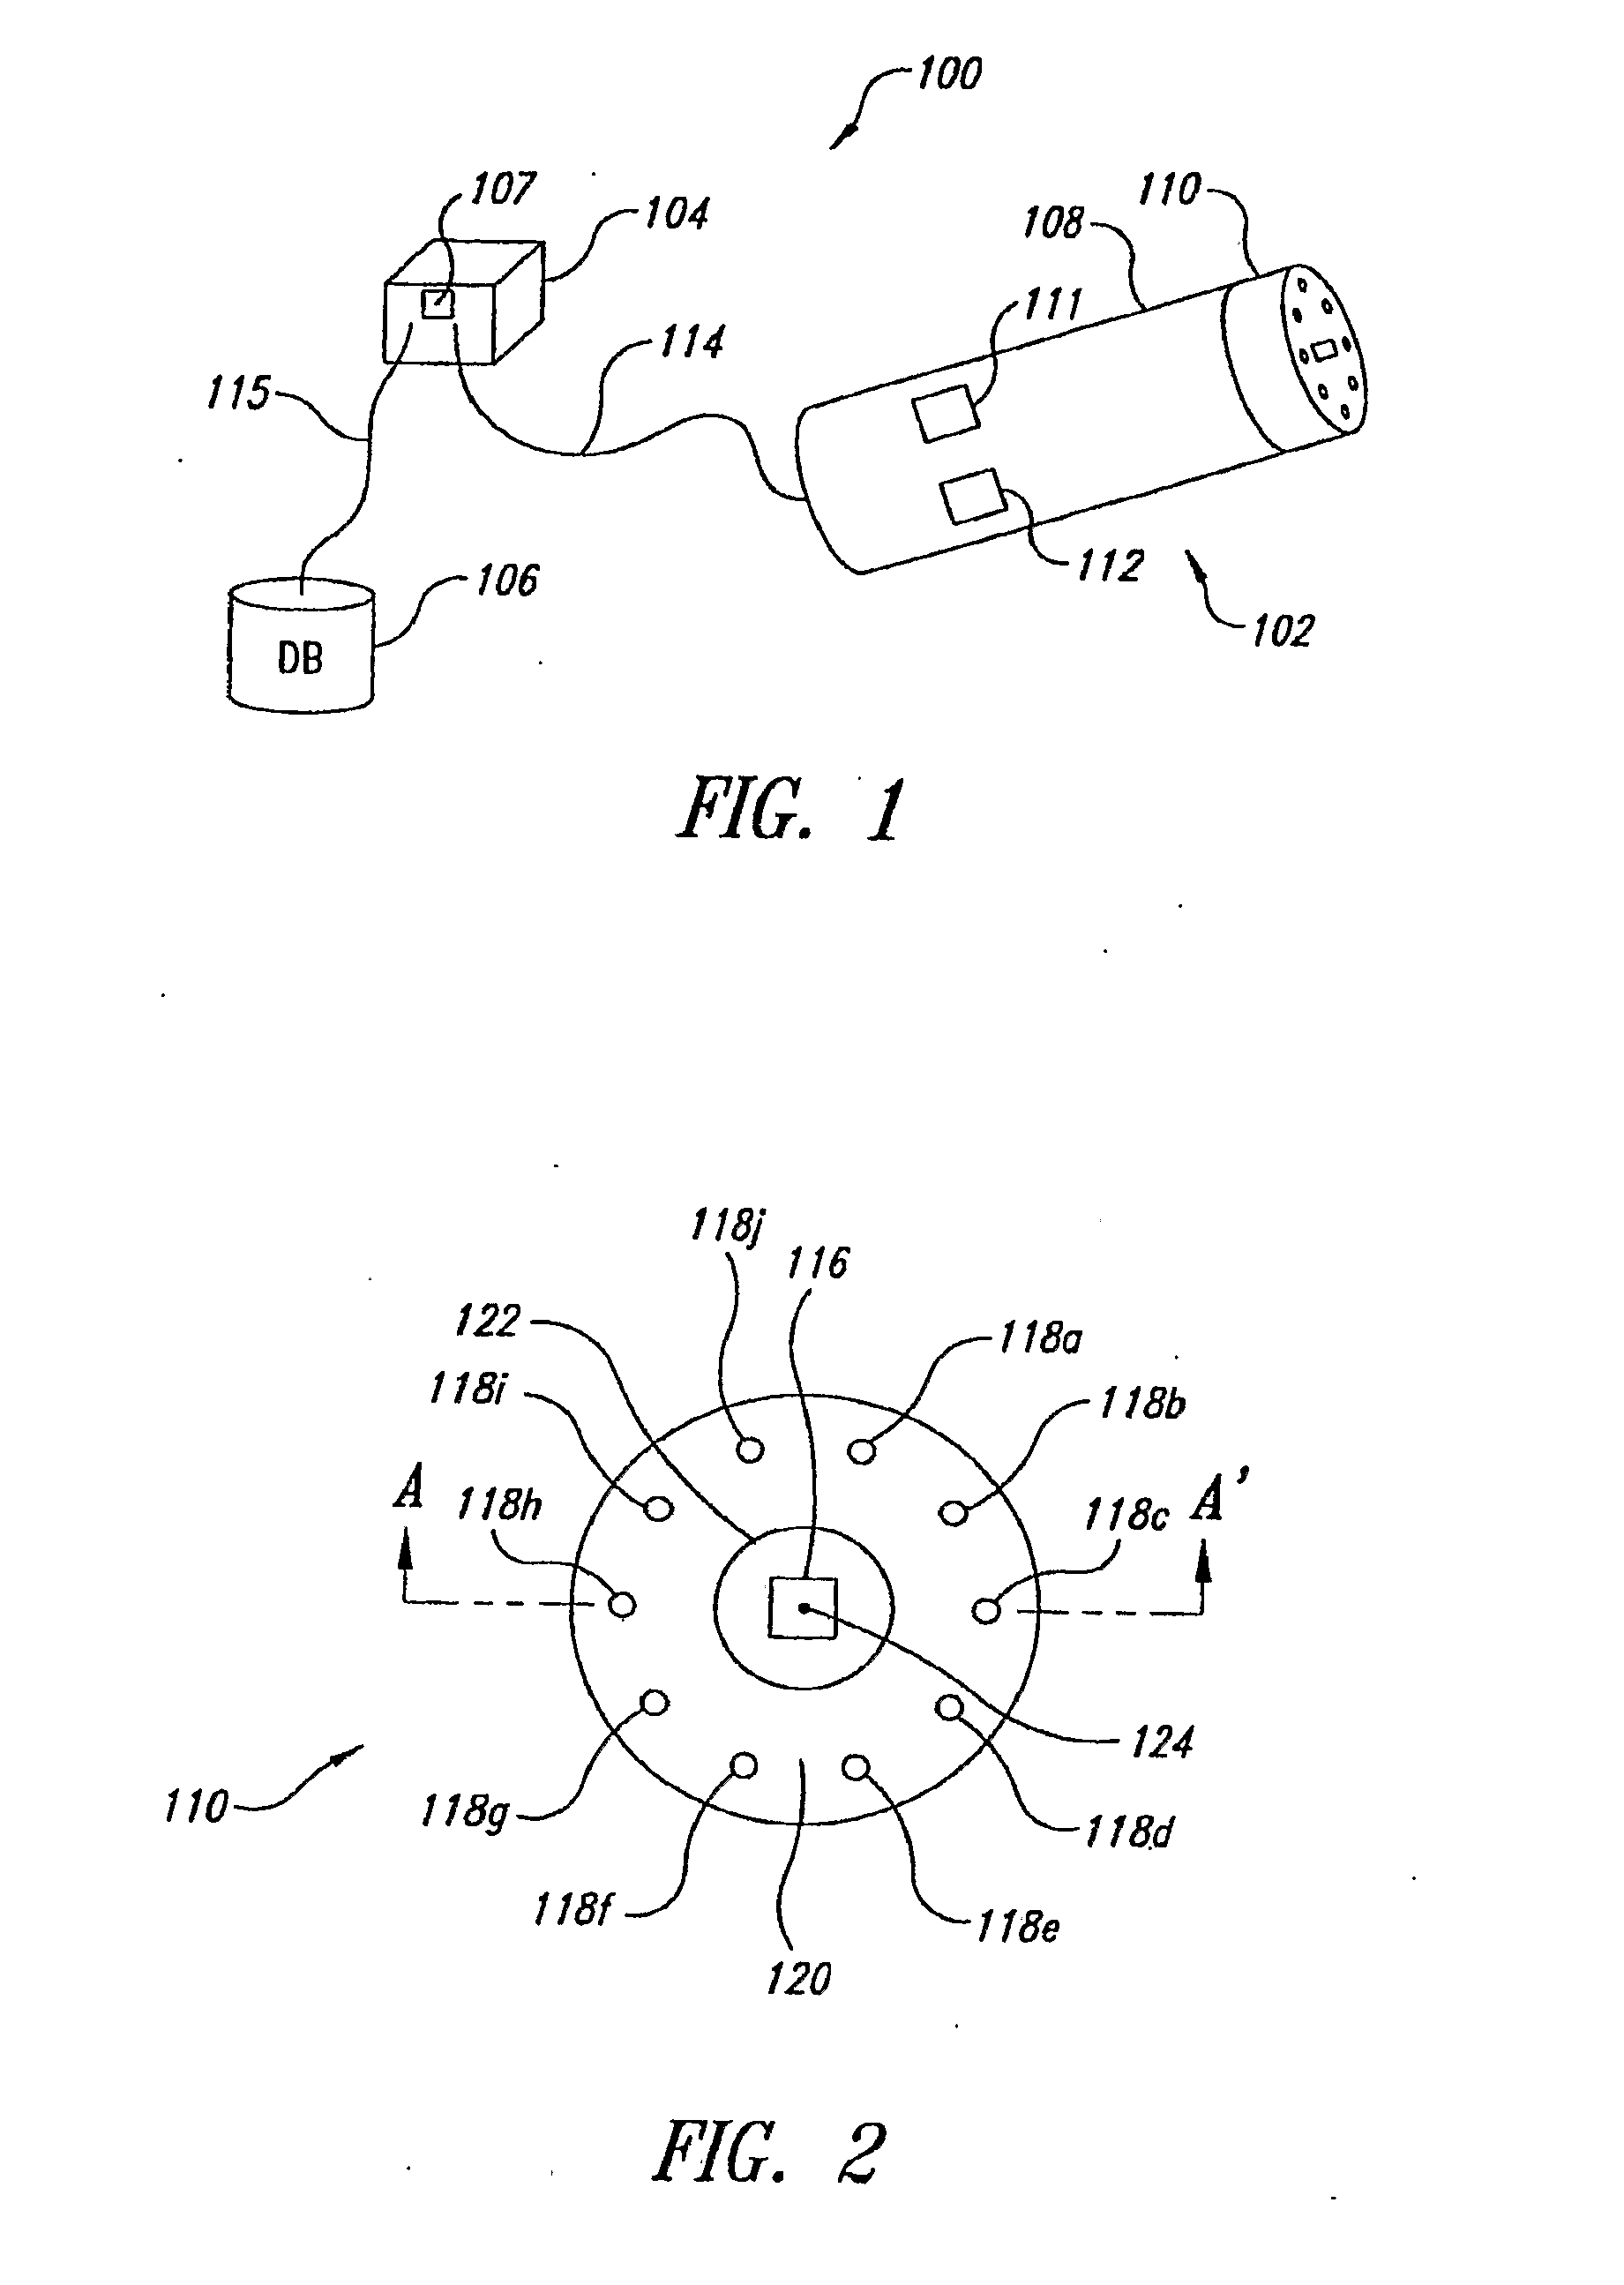 System and method of evaluating an object using electromagnetic energy